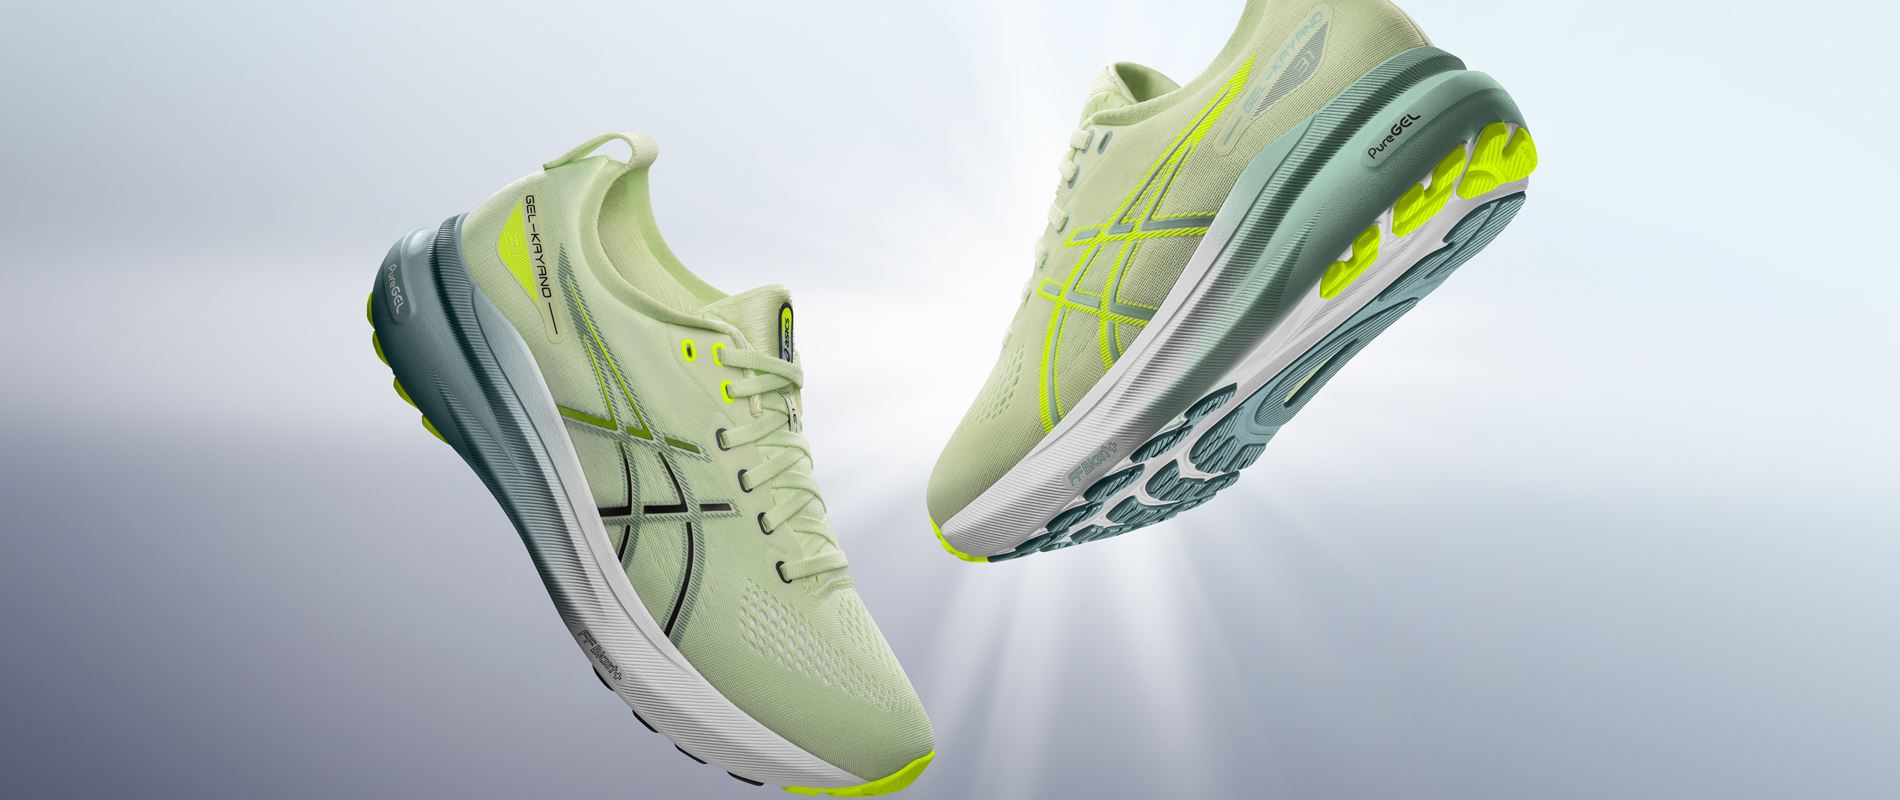 stability-never-felt-like-this--premium-comfort-in-every-step-with-asics--gel-kayano--31-shoe